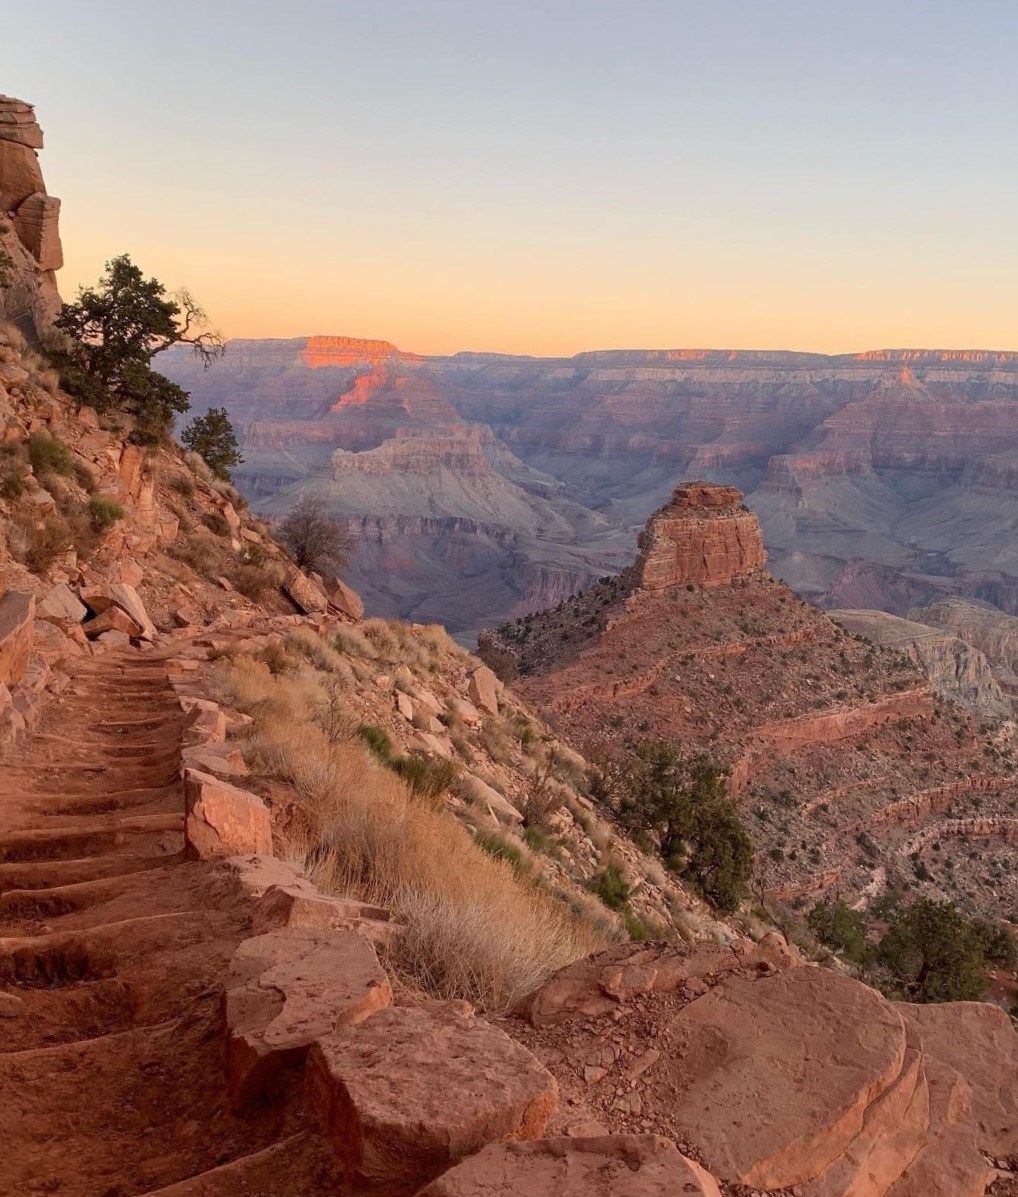 Early morning sunrise views from South Kaibab trail in March 2021. Photo courtesy of A. Brill